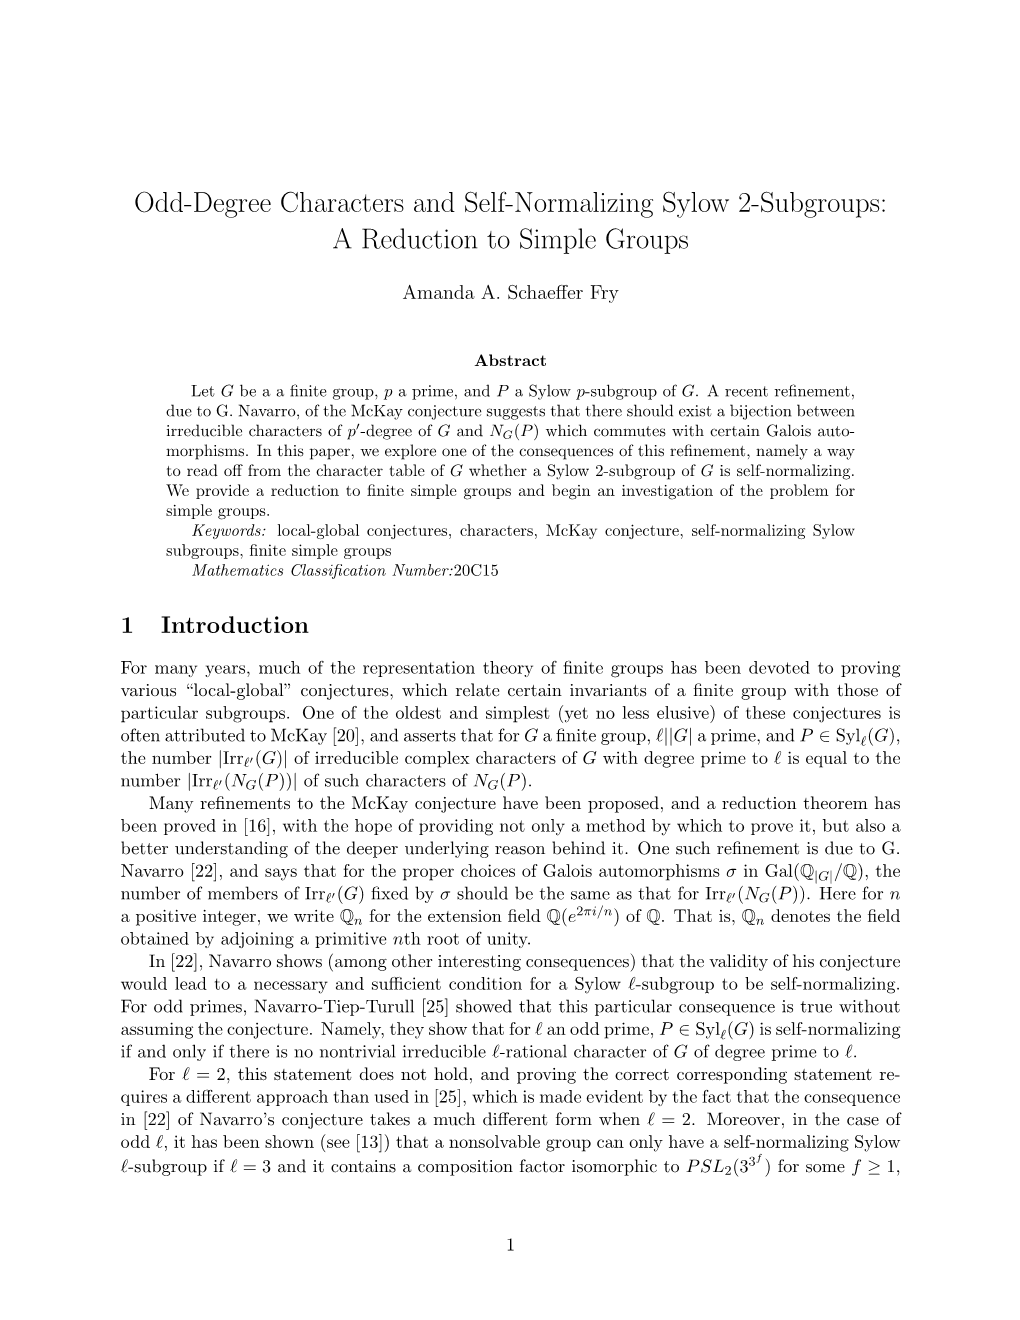 Odd-Degree Characters and Self-Normalizing Sylow 2-Subgroups: a Reduction to Simple Groups